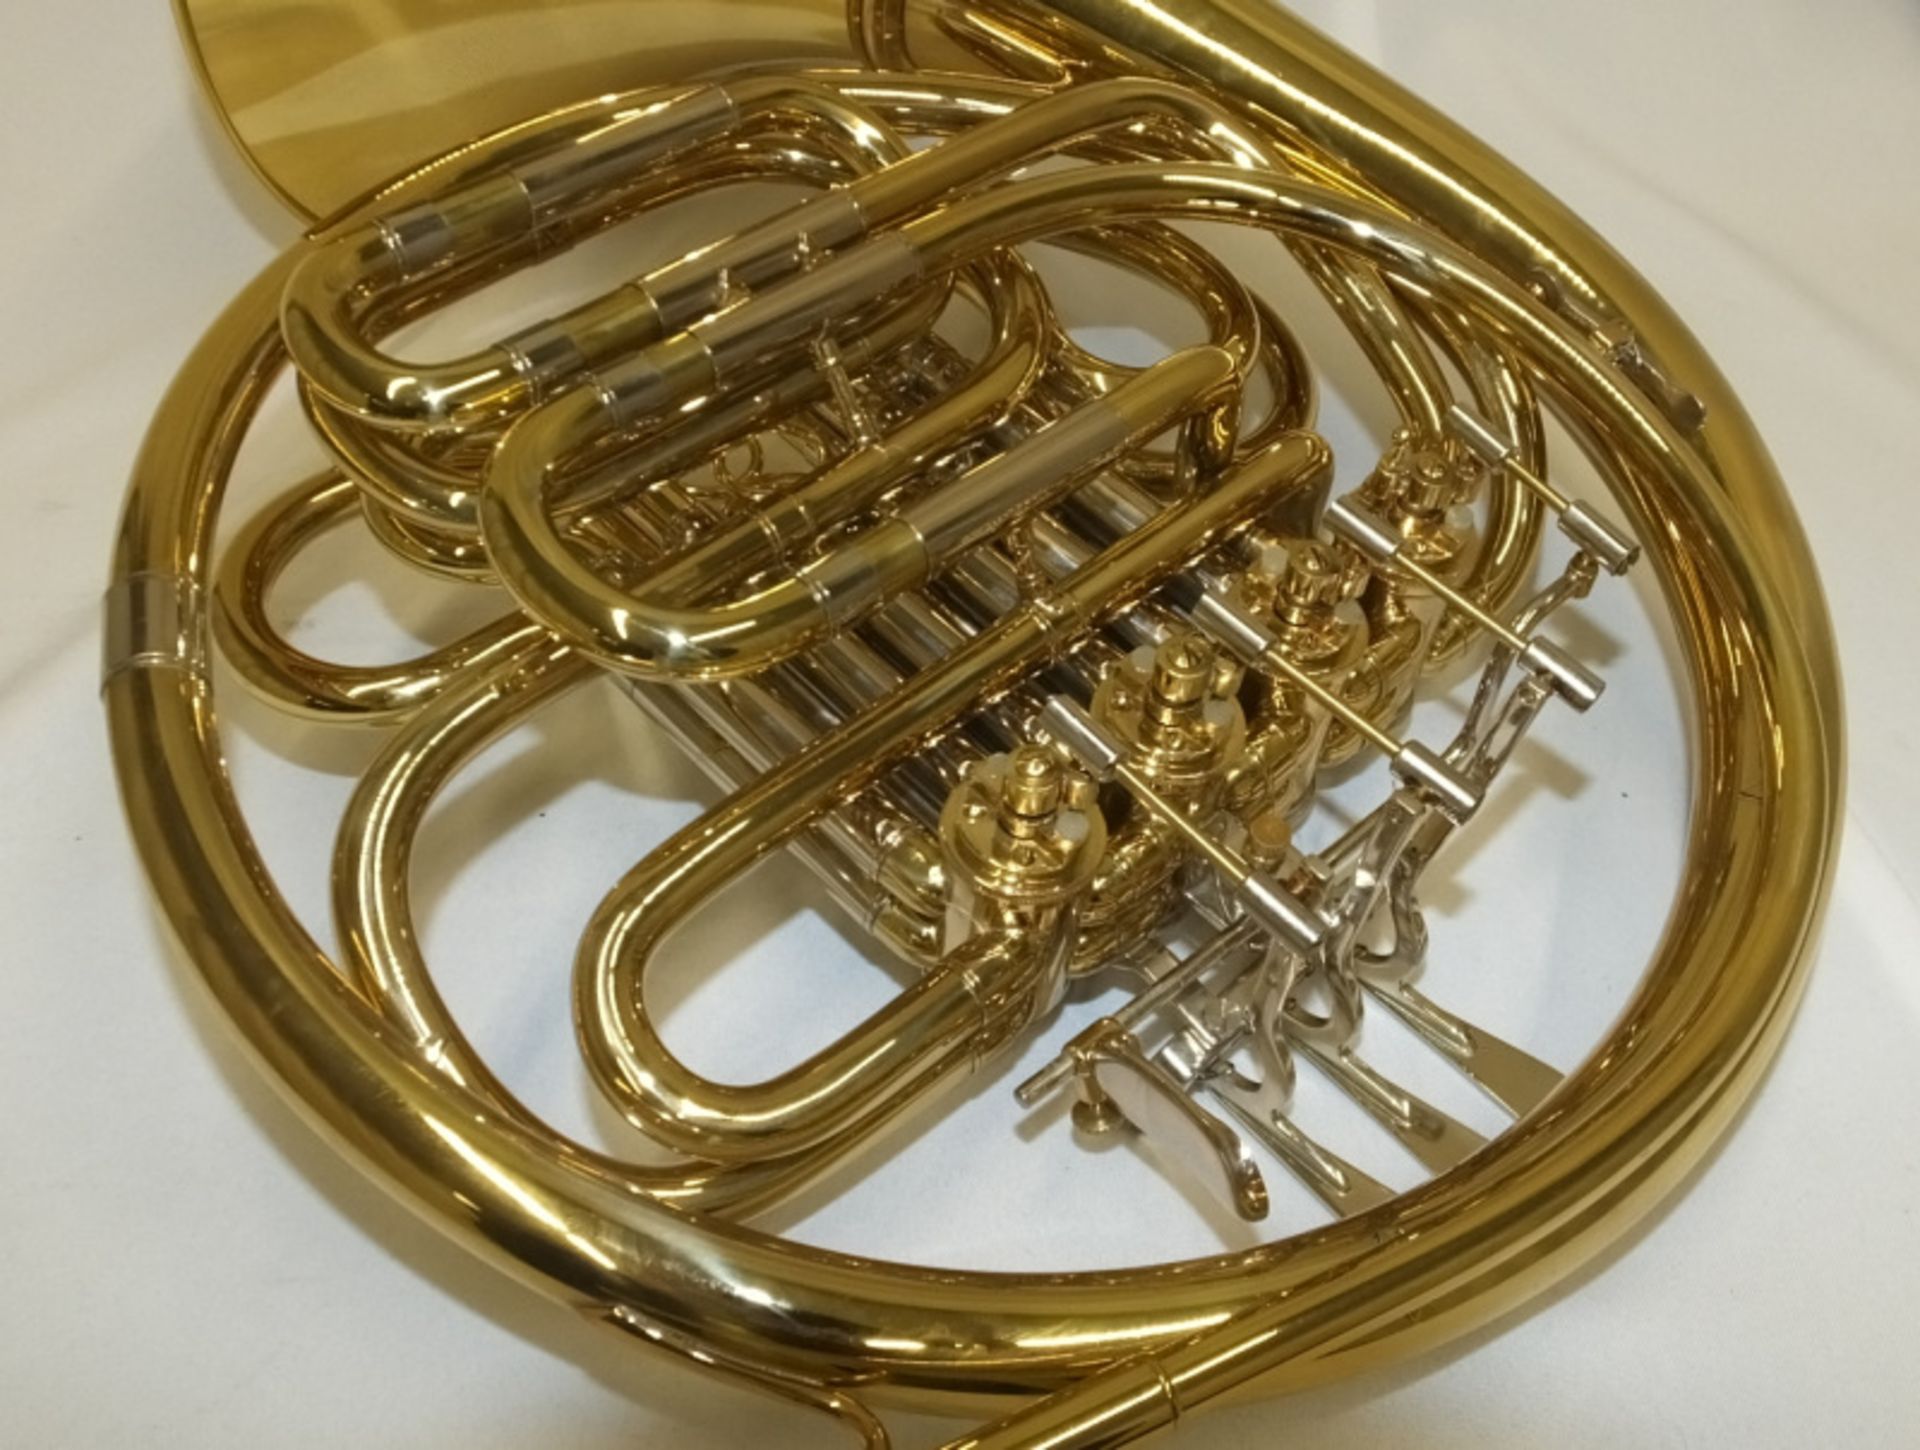 Gear 4 Music French Horn in case - Please check photos carefully for damaged or missing components - Image 8 of 11